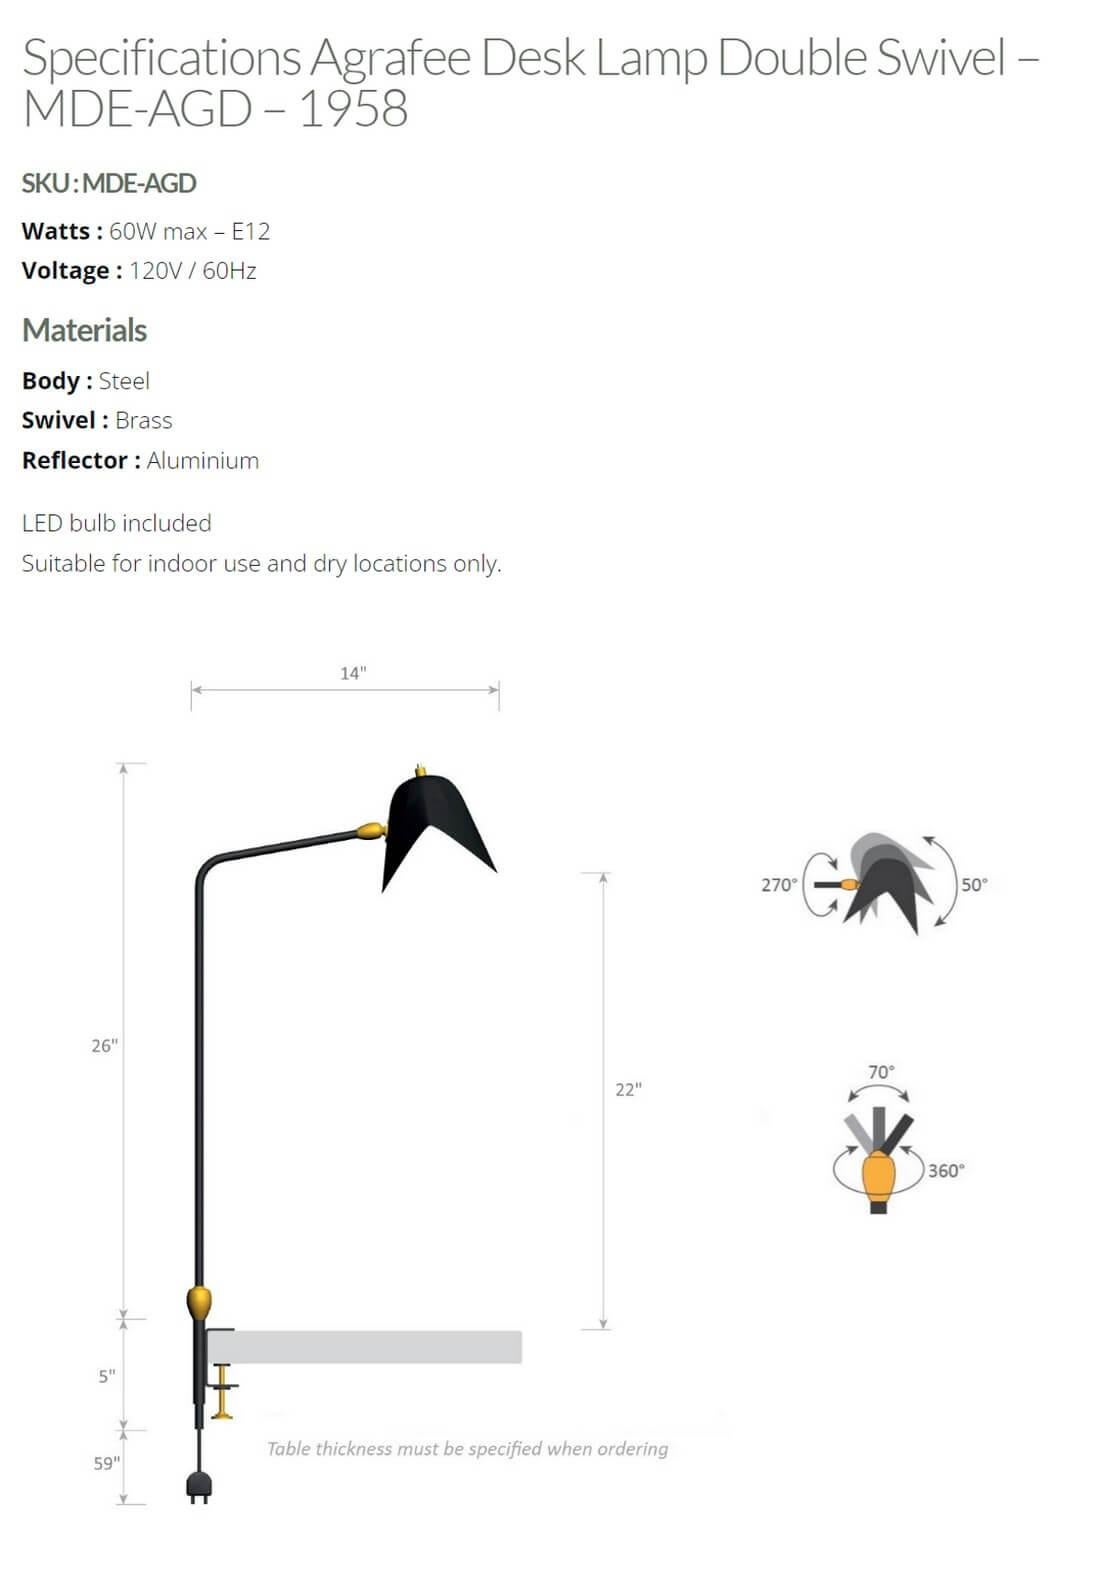 Contemporary Serge Mouille - Agrafee Desk Lamp with Double Swivel in Black - IN STOCK! For Sale